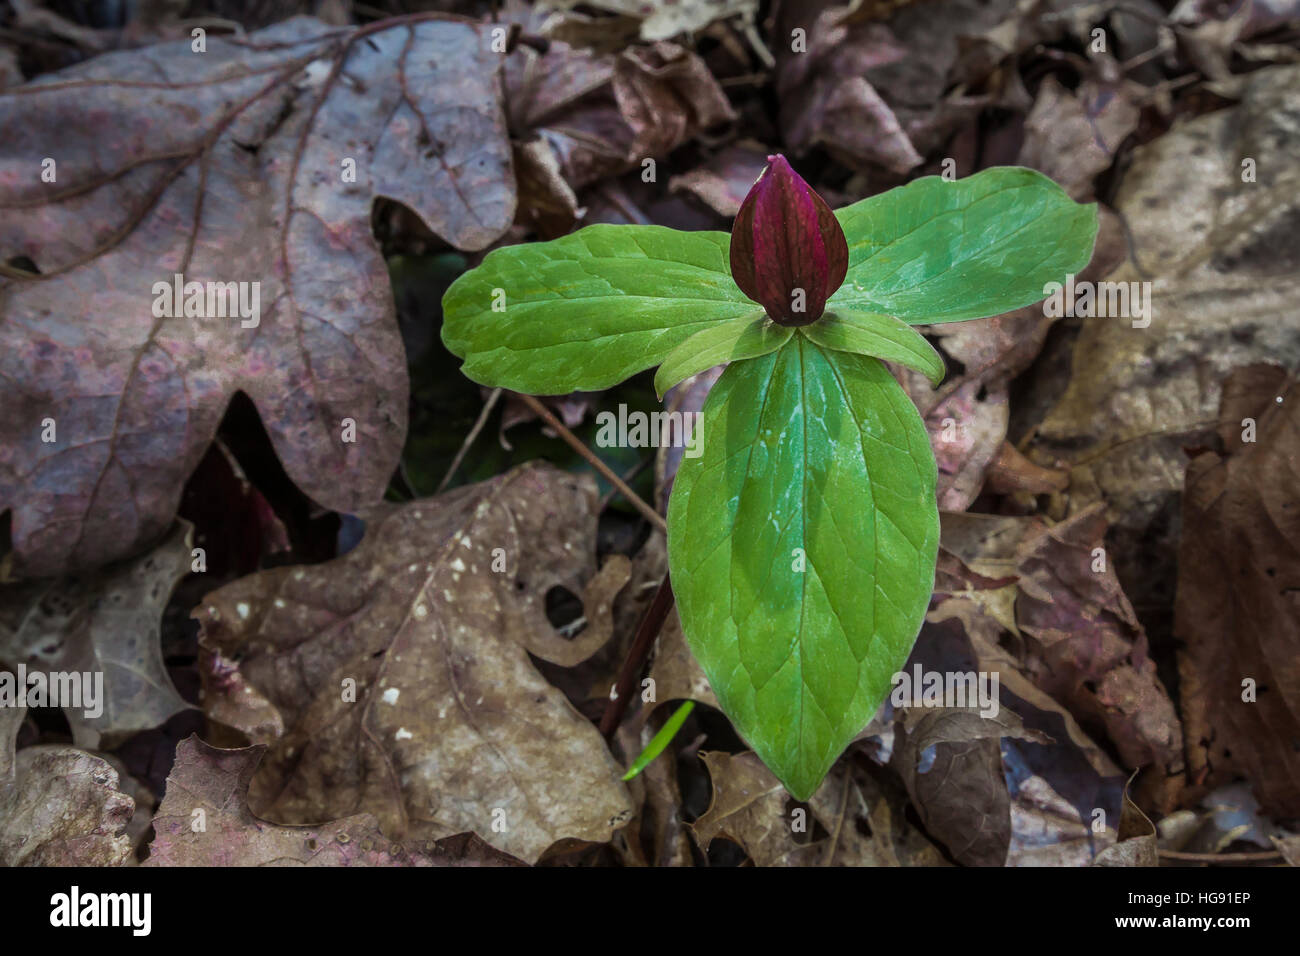 Toadshade, Trillium sessile, aka Sessile Trillium and Toad Trillium, flowering in the forest along Ohio Brush Creek in Serpent Mound State Memorial in Stock Photo